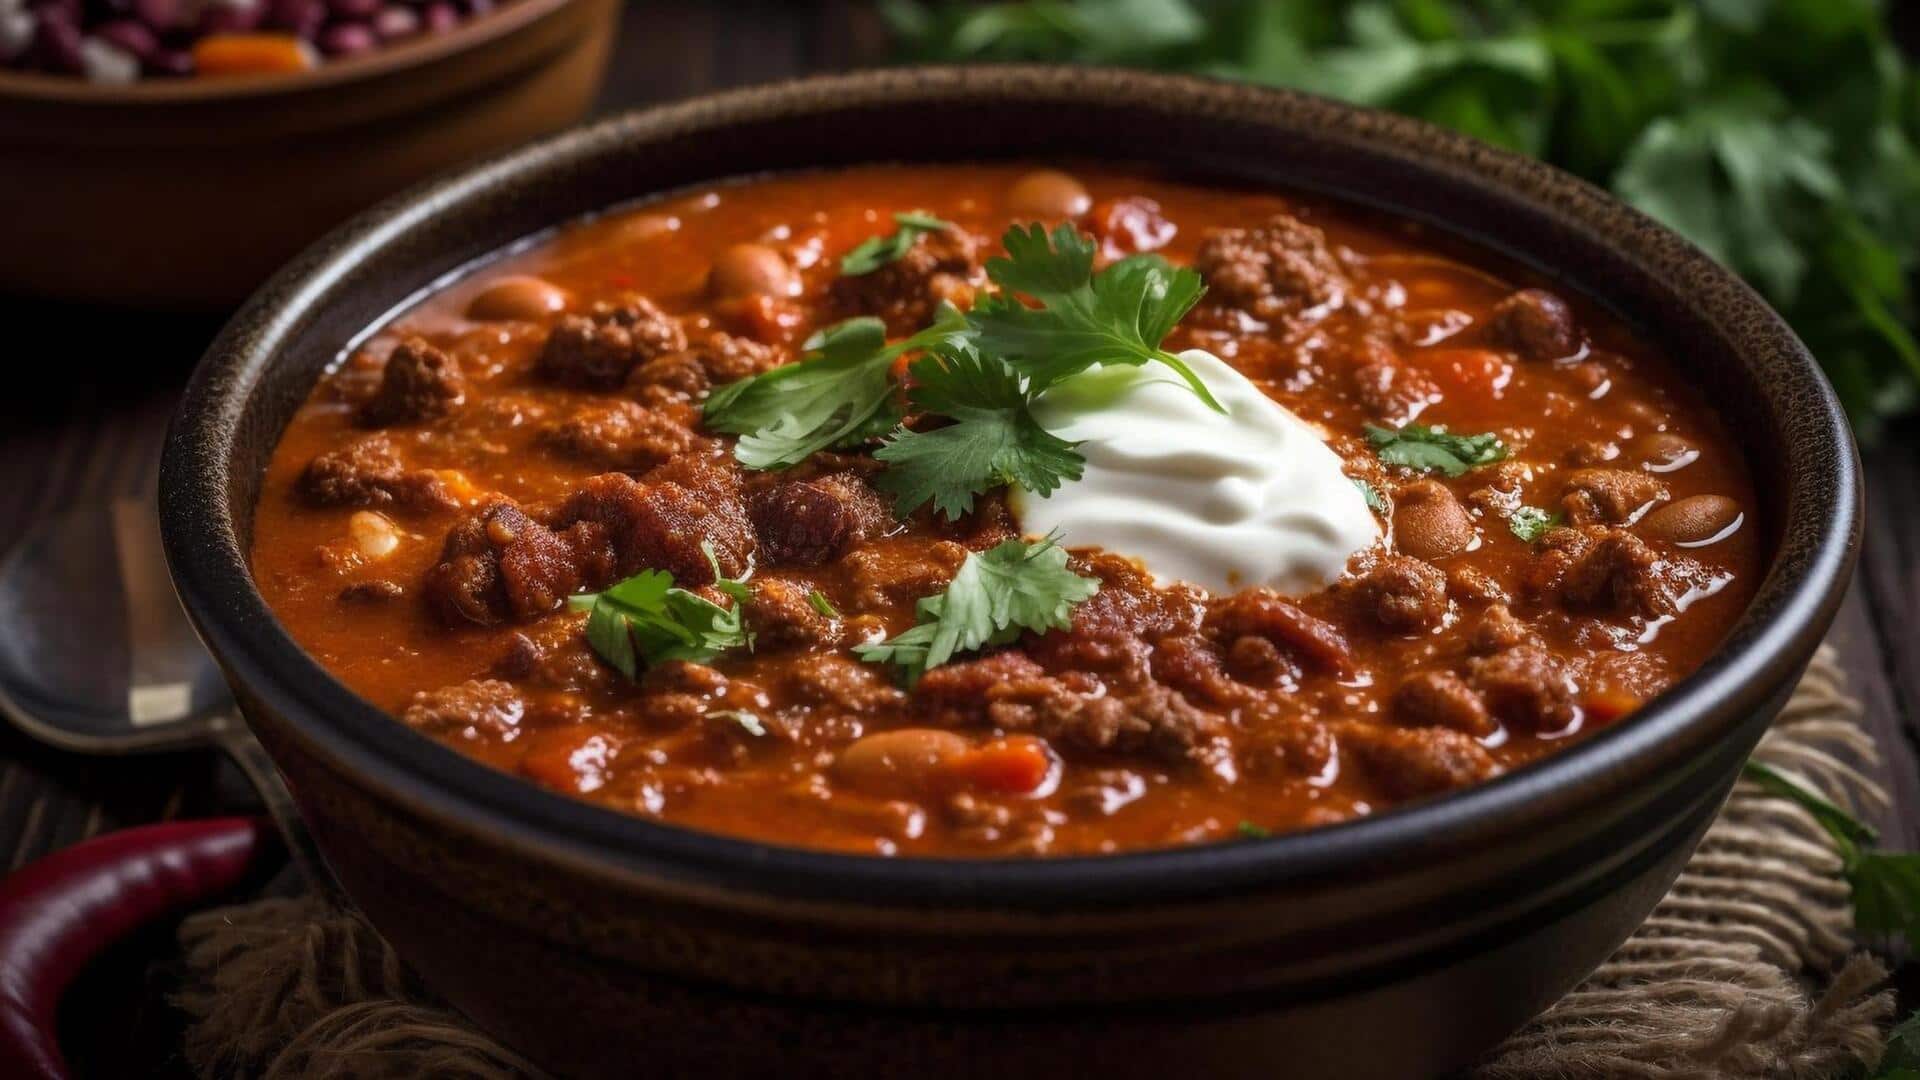 Rajma ranked twice among the world's top 50 beans dishes